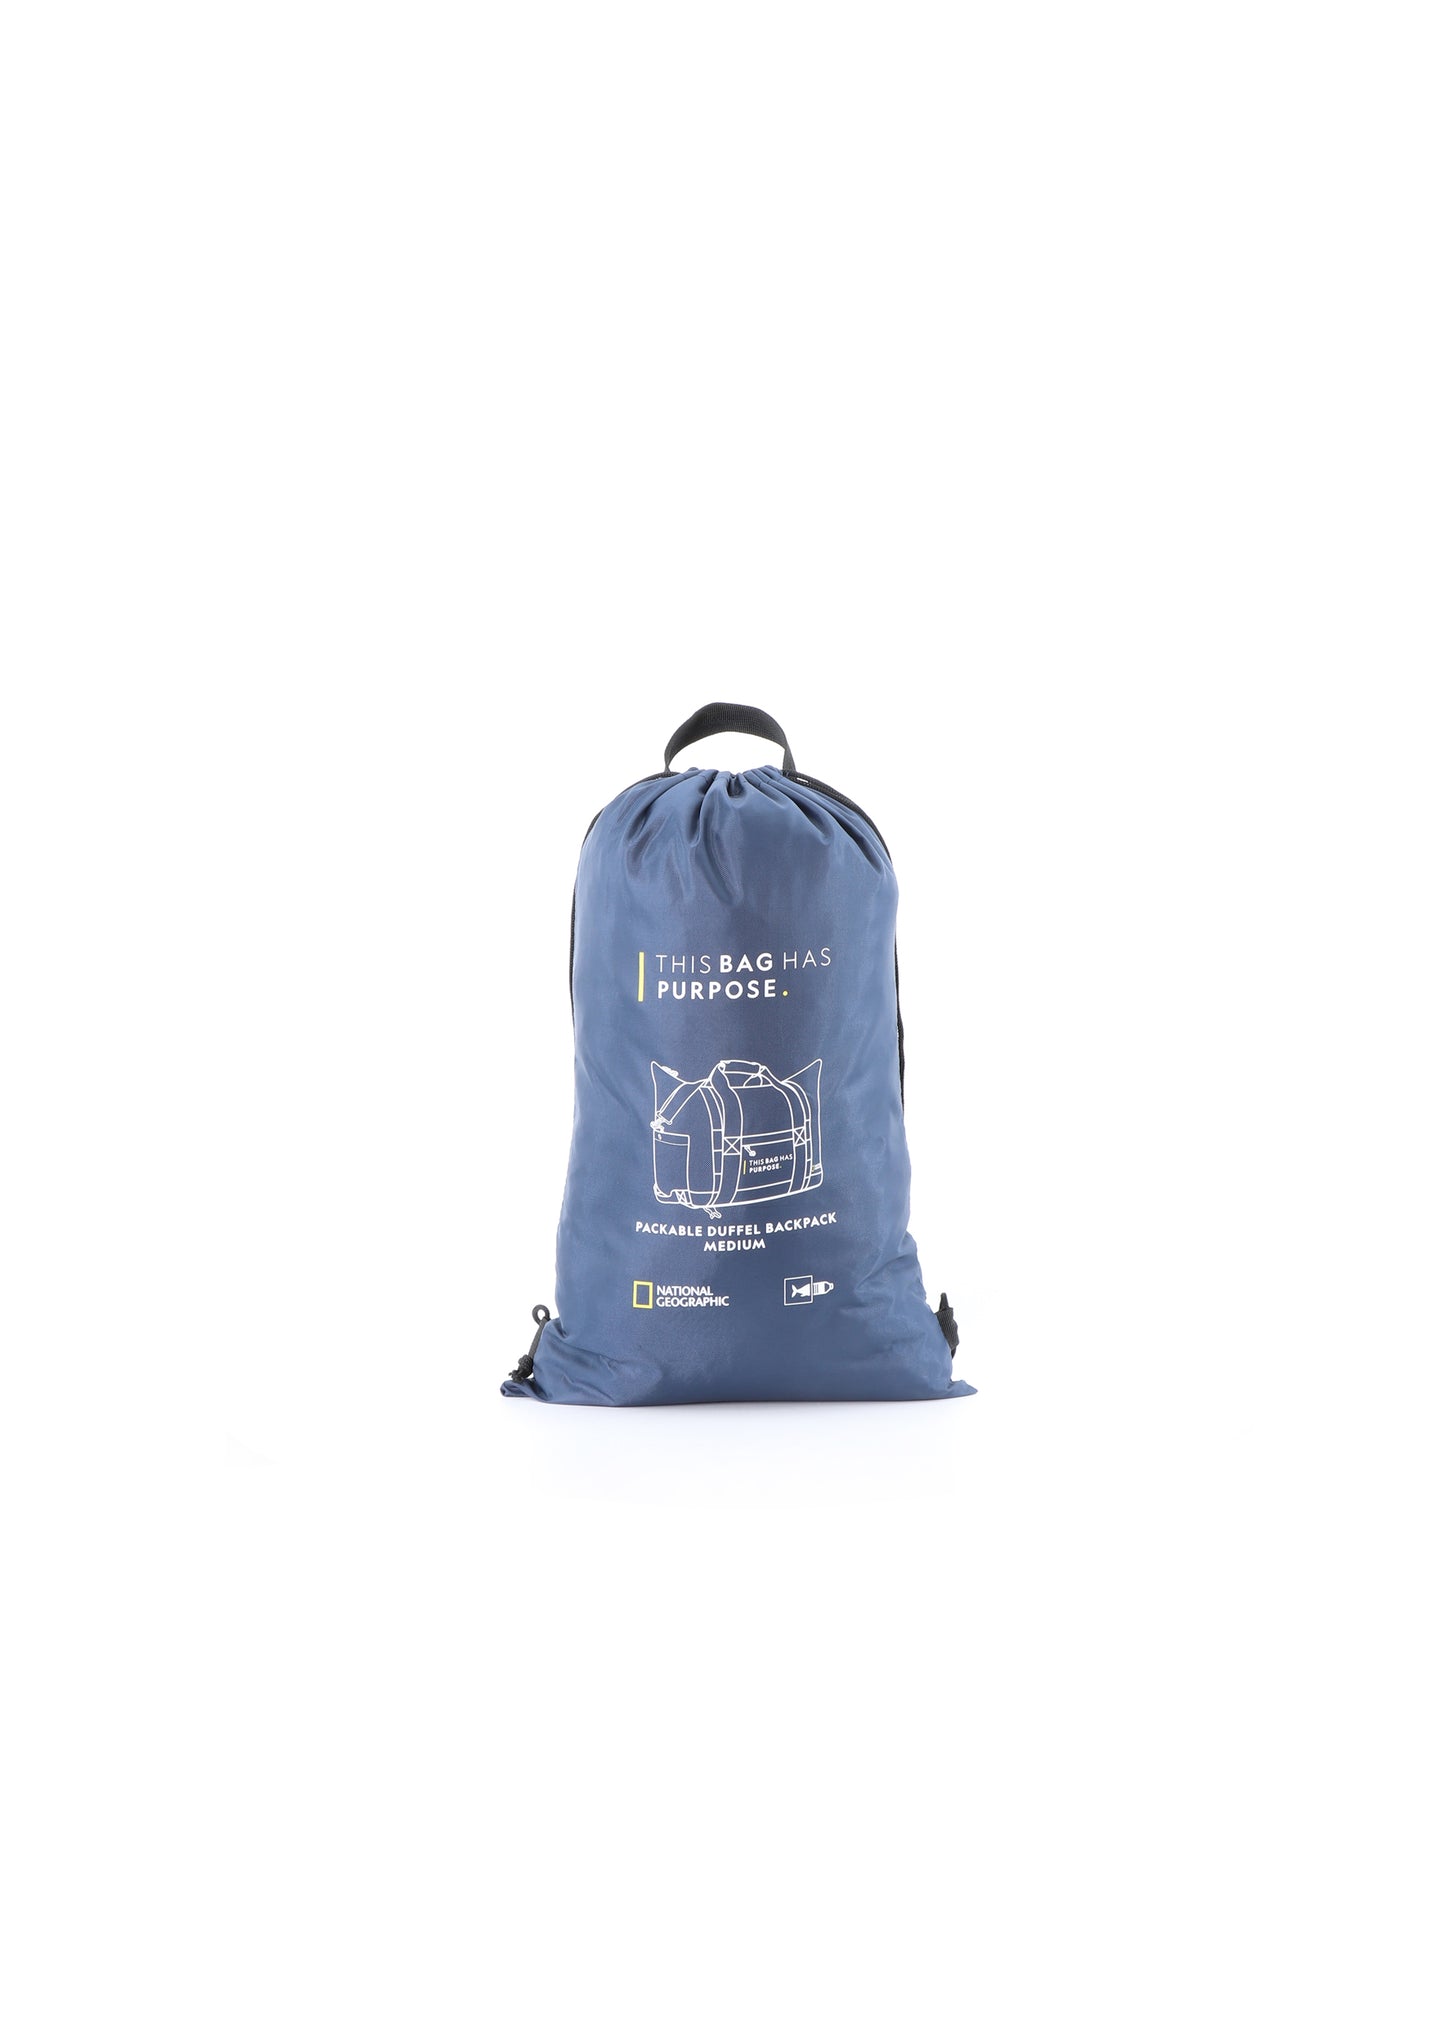 National Geographic Pathway M - Voorkant Blauw opvouw tas | luggage4u.be